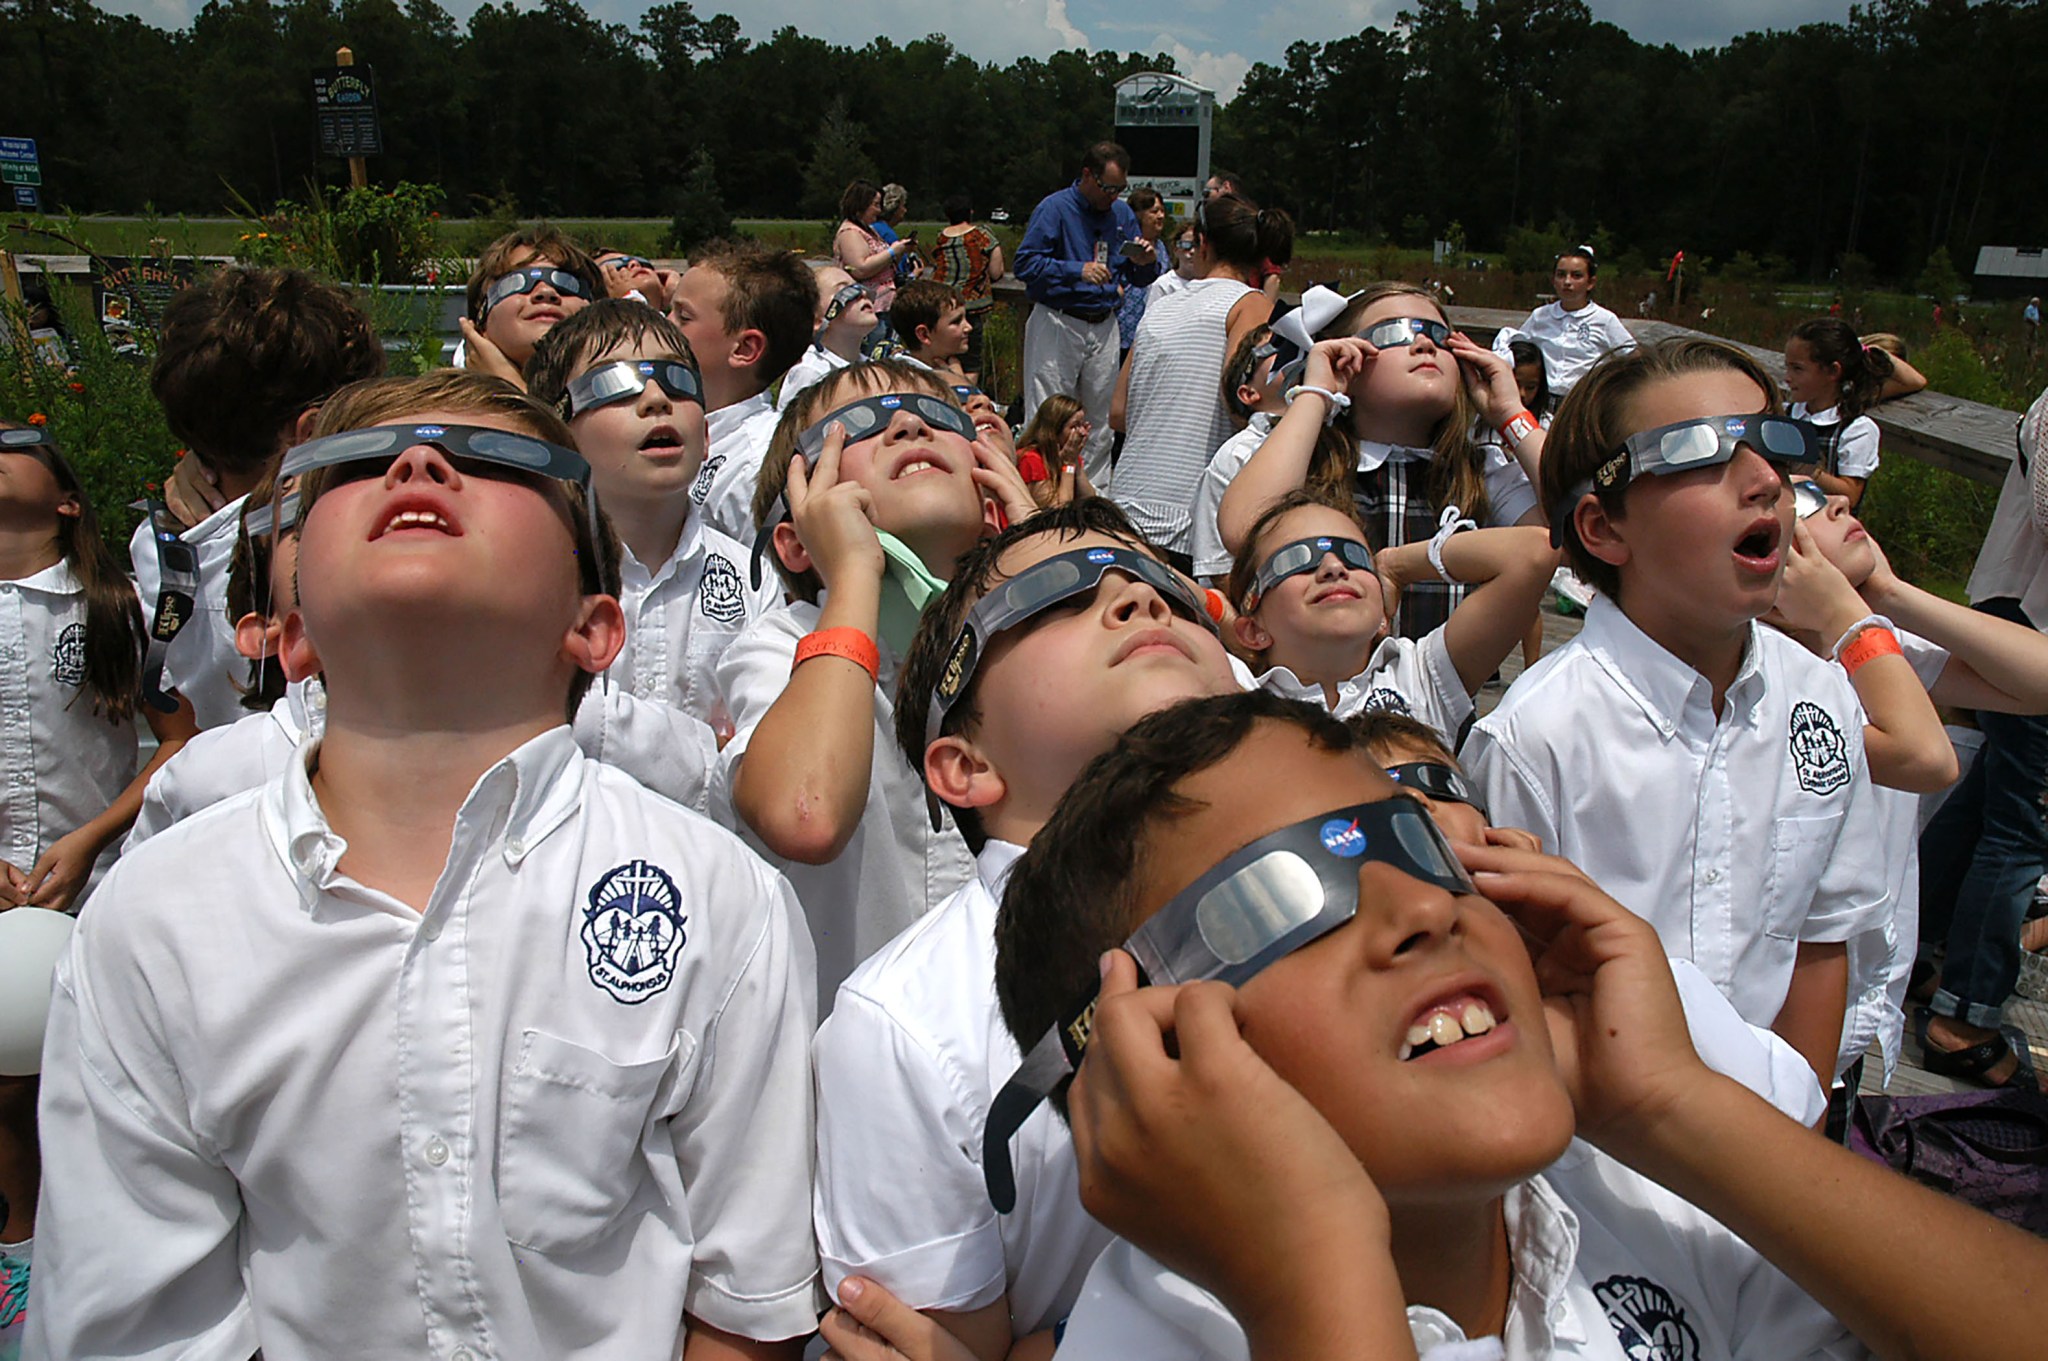 Mississippi students view a solar eclipse during their visit to INFINITY Science Center in August 2017.